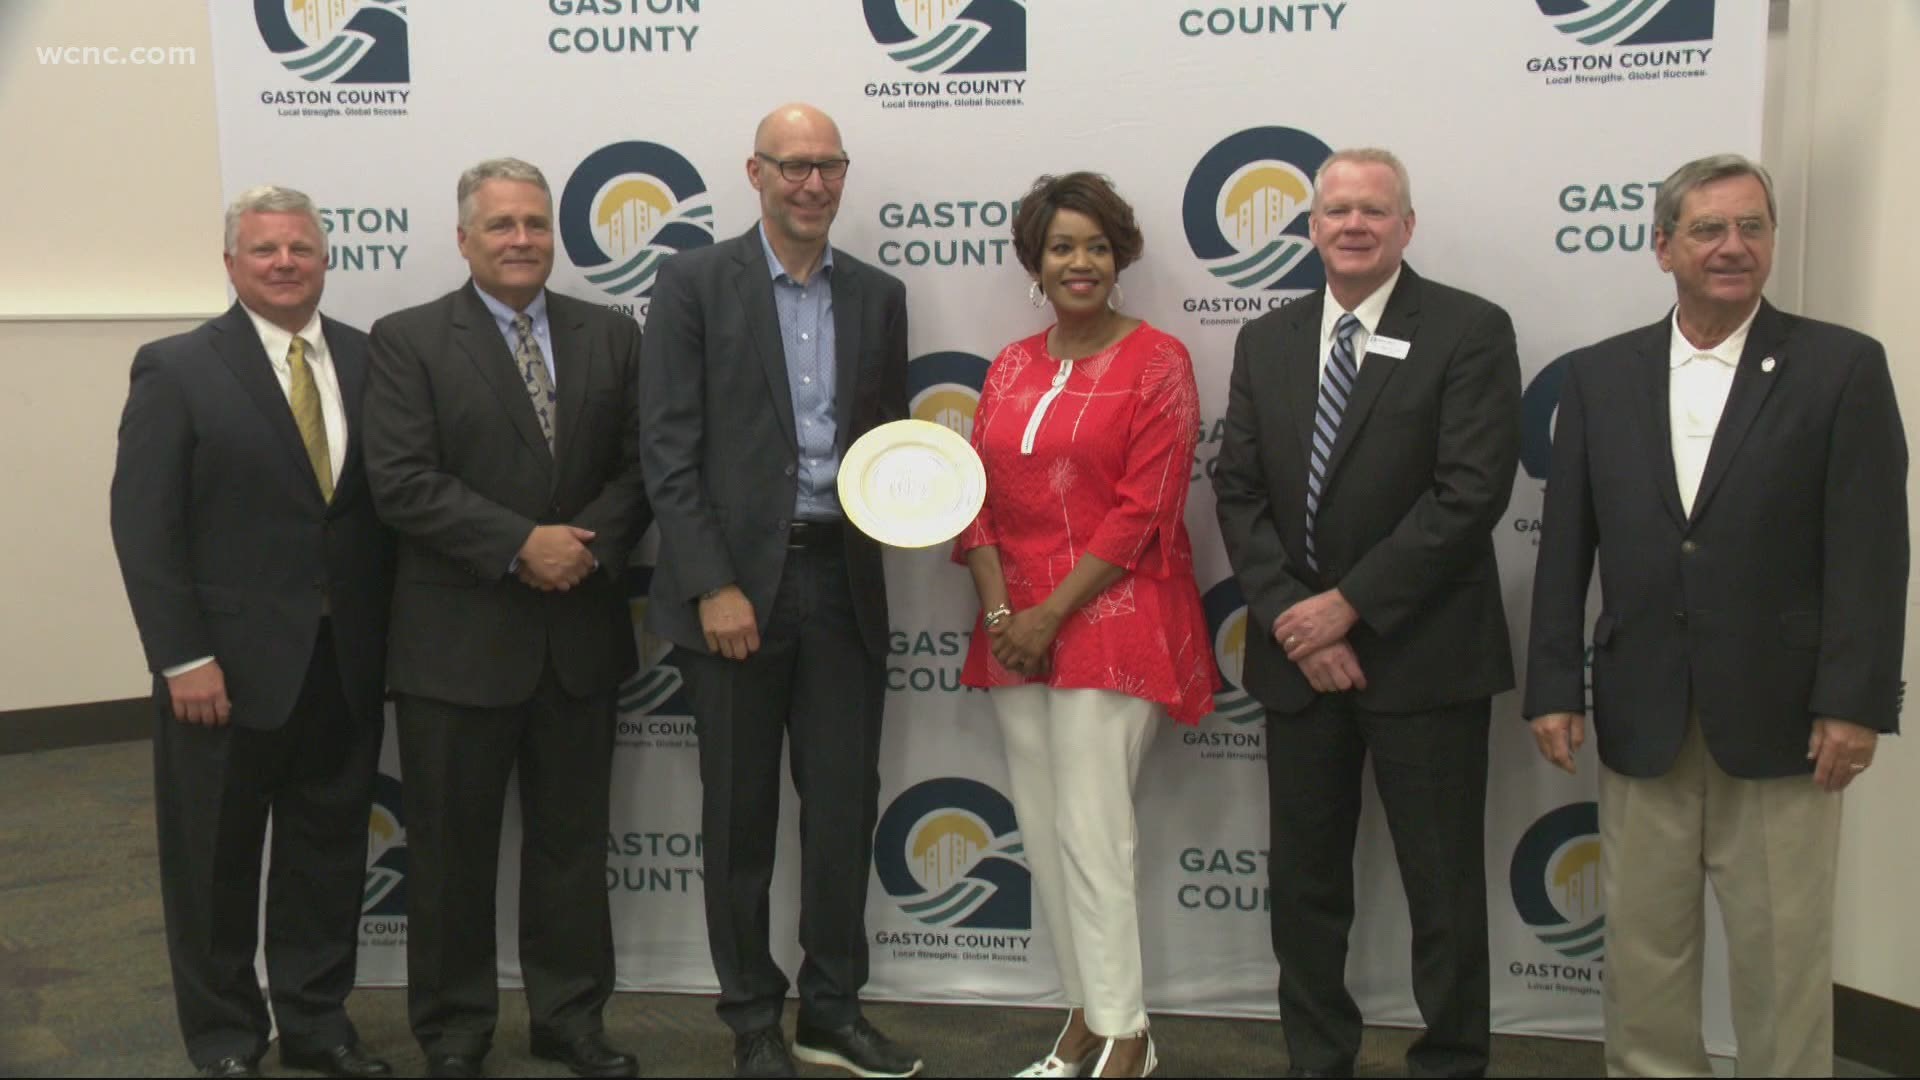 Gaston College announced a partnership with a high-tech manufacturing company building a new headquarters in Gastonia, North Carolina.